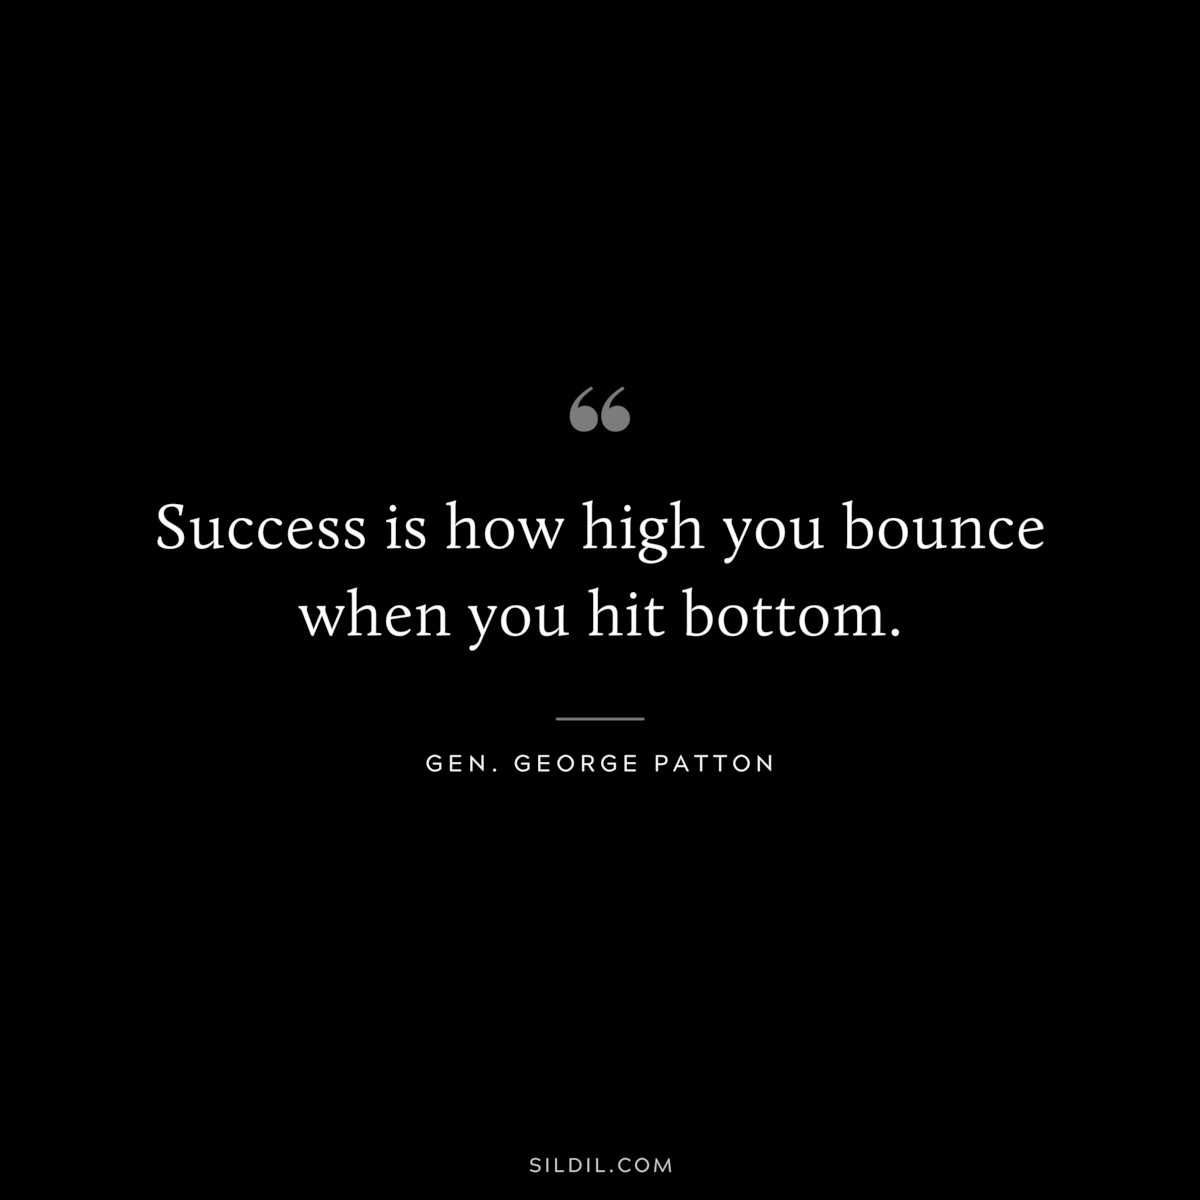 Success is how high you bounce when you hit bottom. ― Gen. George Patton